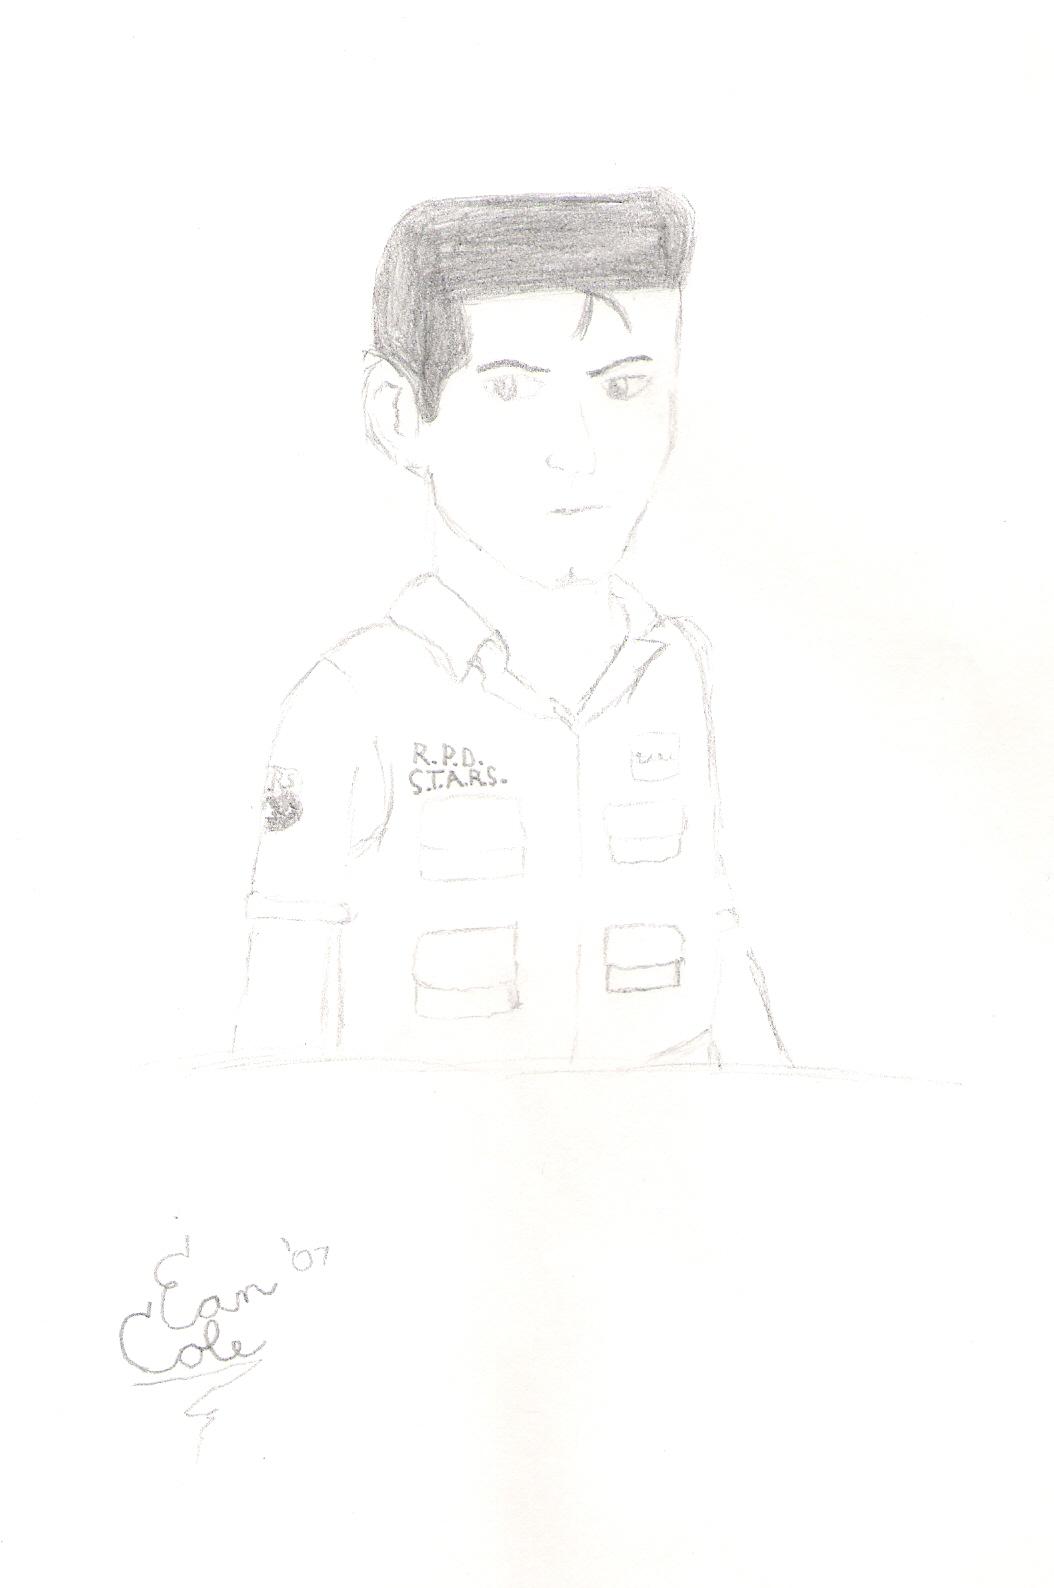 Manga Style Chris Redfield by EanCole